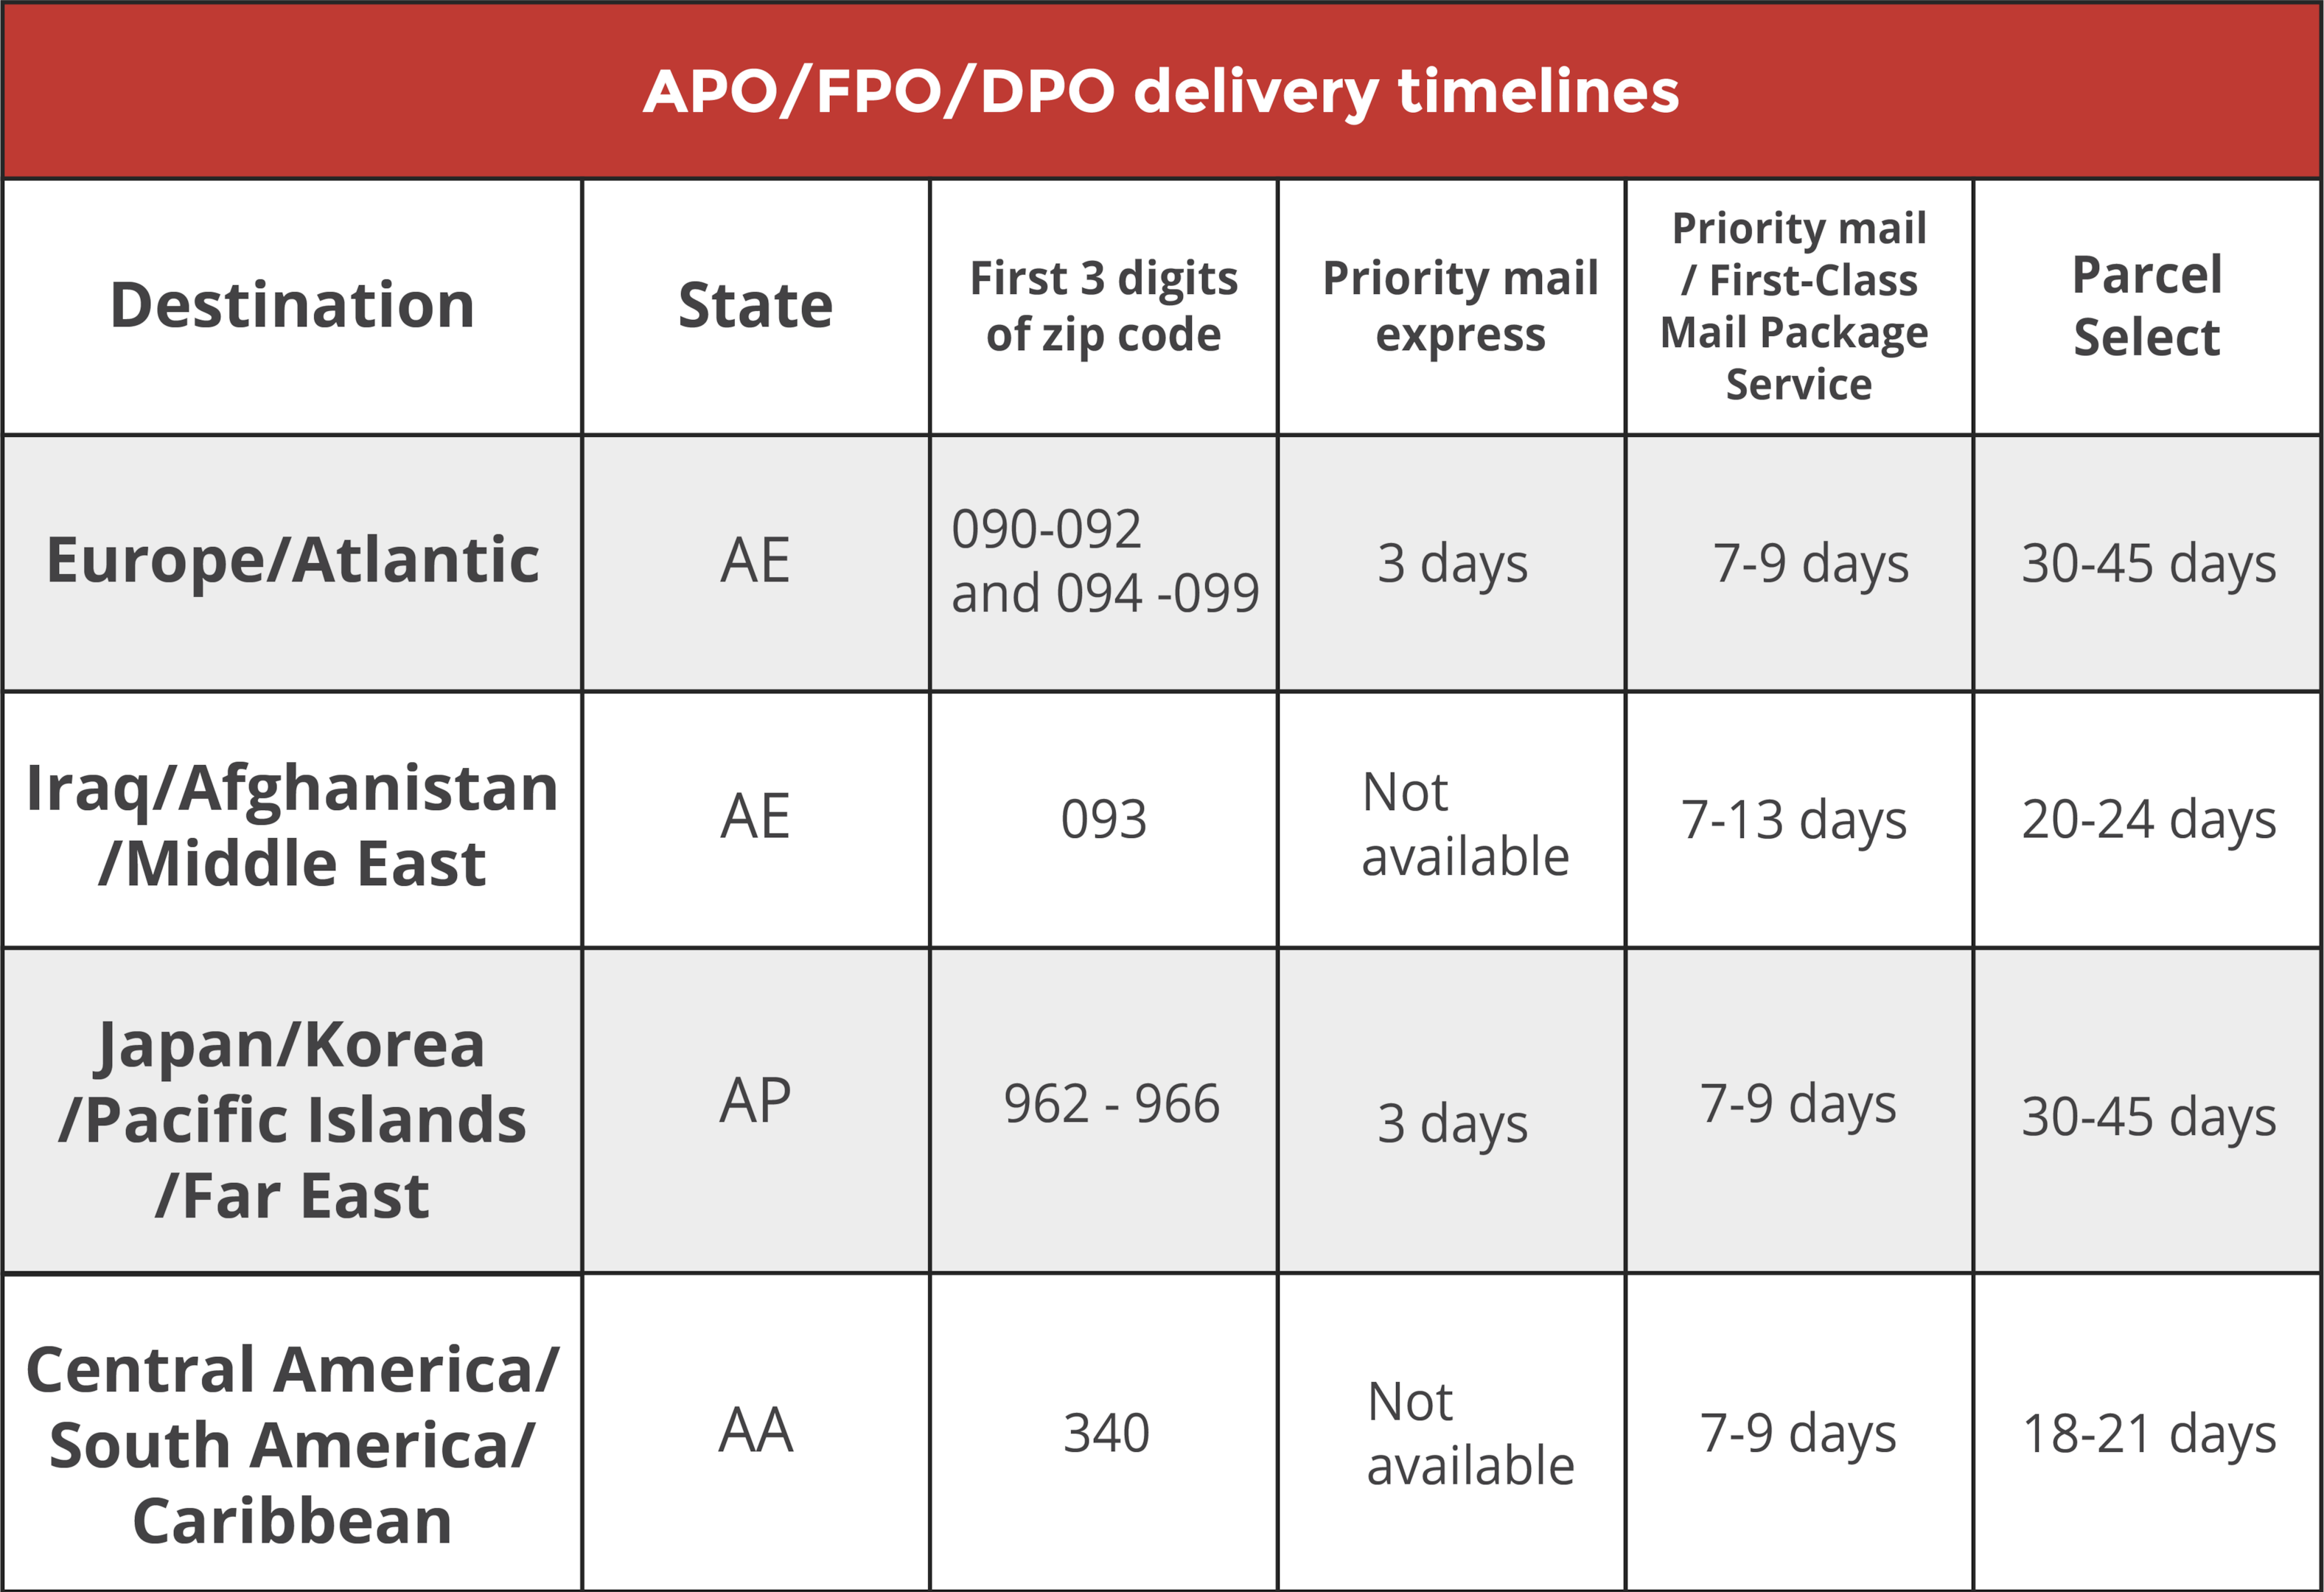 chart showing delivery timelines for APO, FPO, and DPO shipments